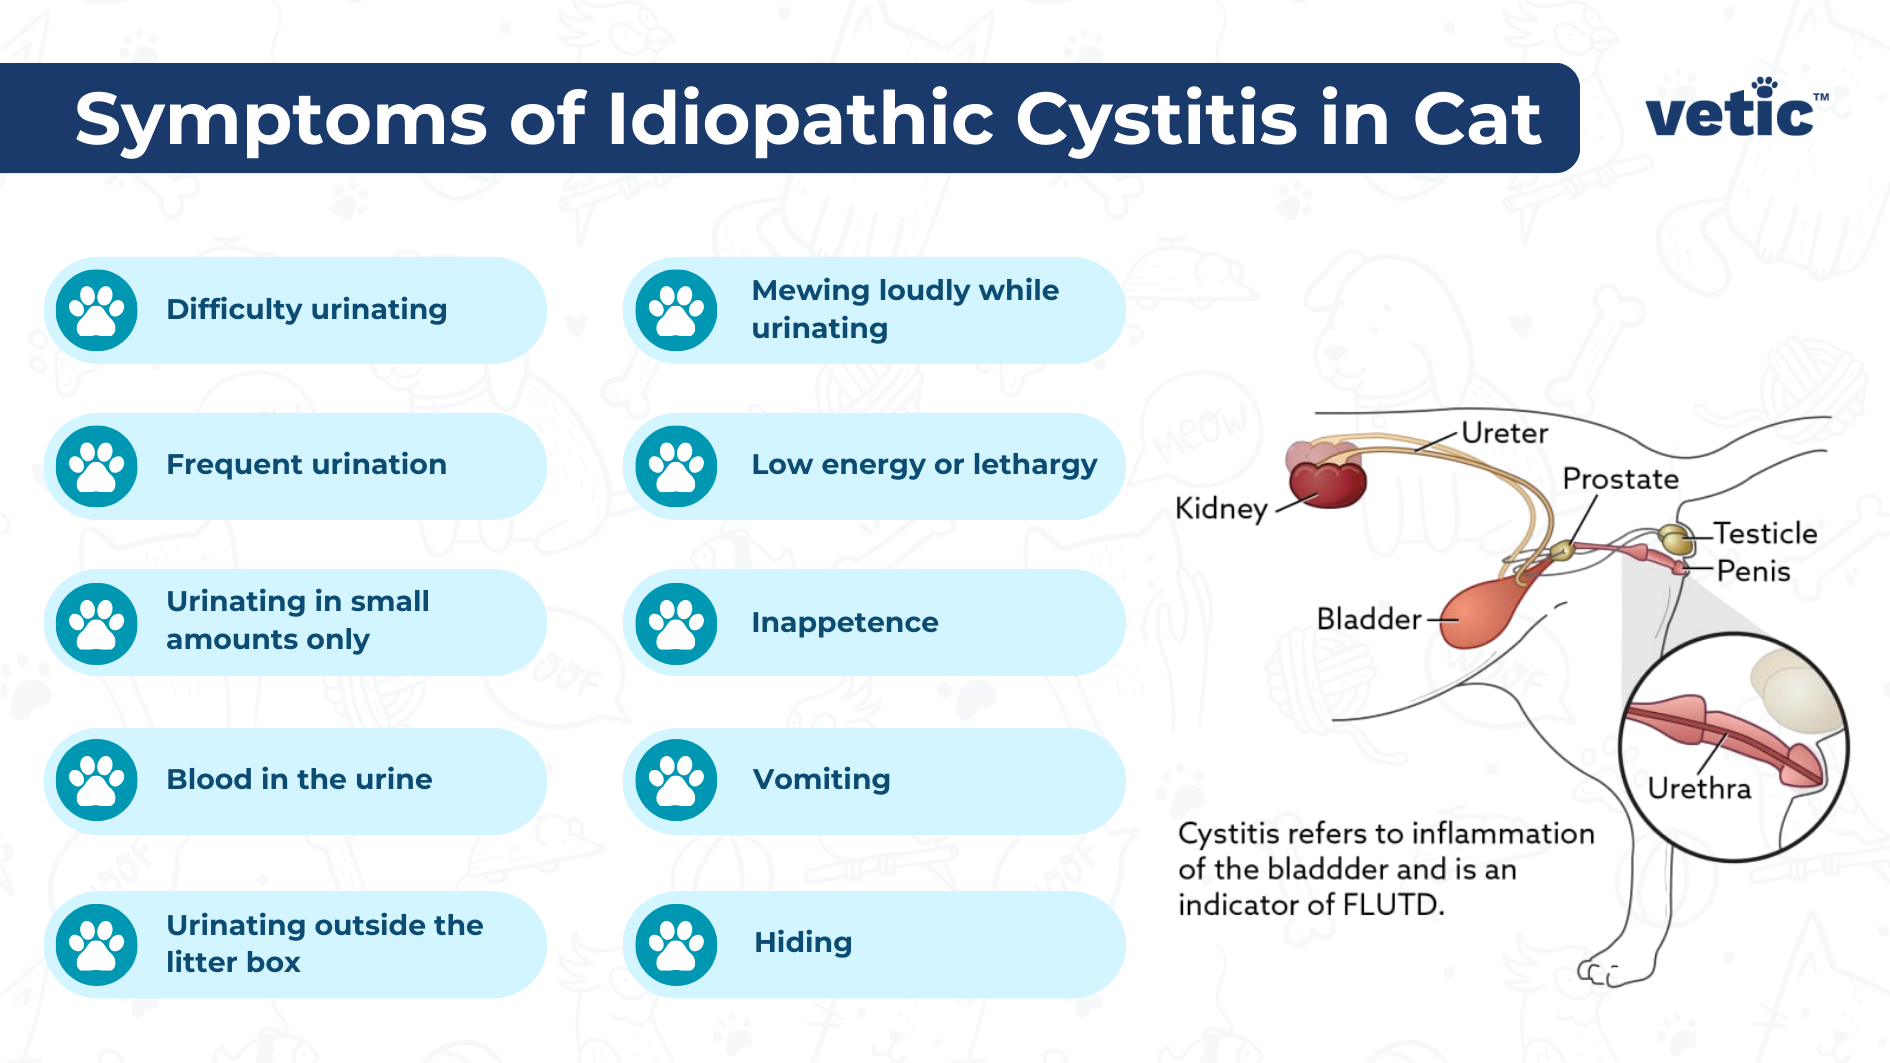 Symptoms of Idiopathic Cystitis in Cats Difficulty in urinating Frequent urination Urinating in small amounts only Blood in the urine Urinating outside the litter box Mewing loudly while urinating Low energy or lethargy Inappetence Vomiting Hiding